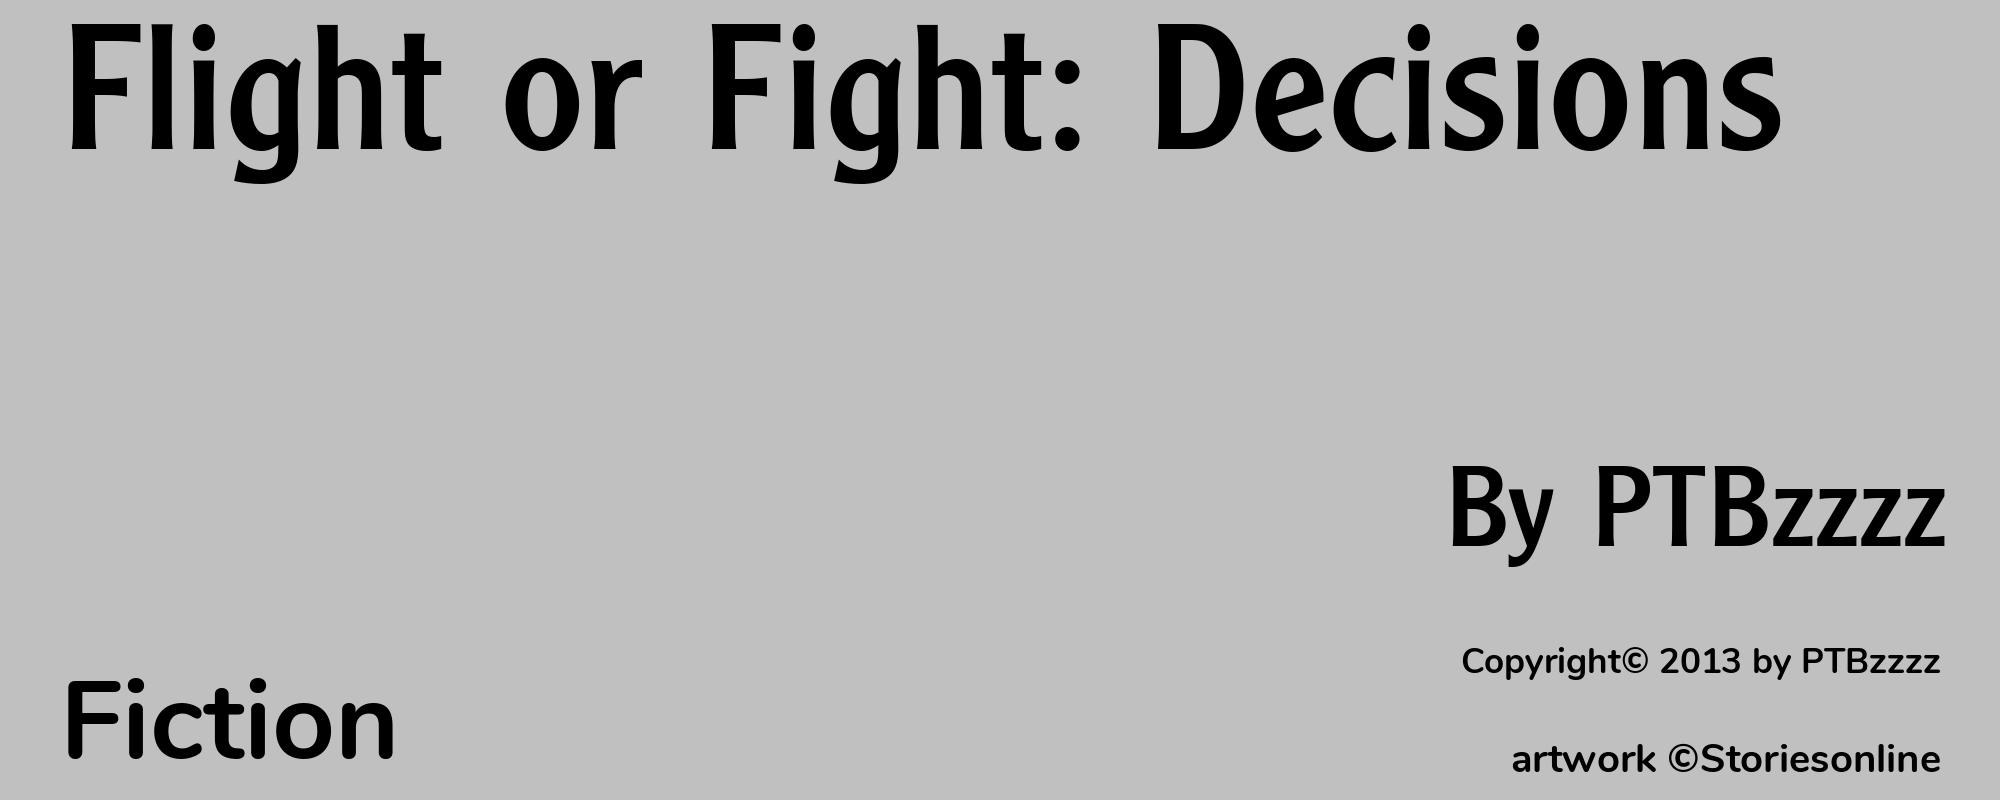 Flight or Fight: Decisions - Cover